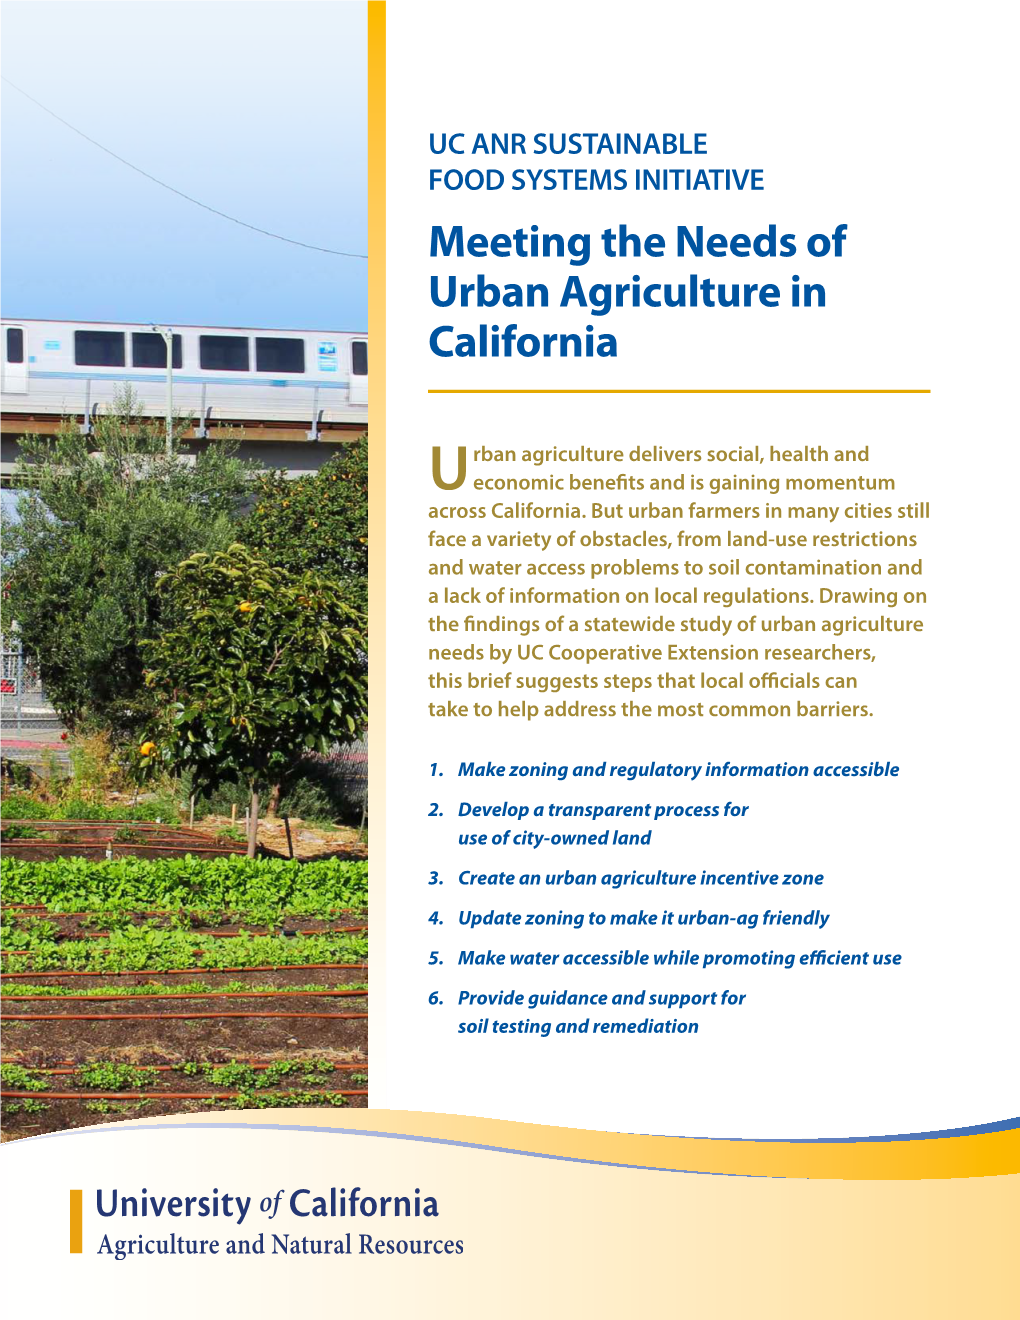 Meeting the Needs of Urban Agriculture in California